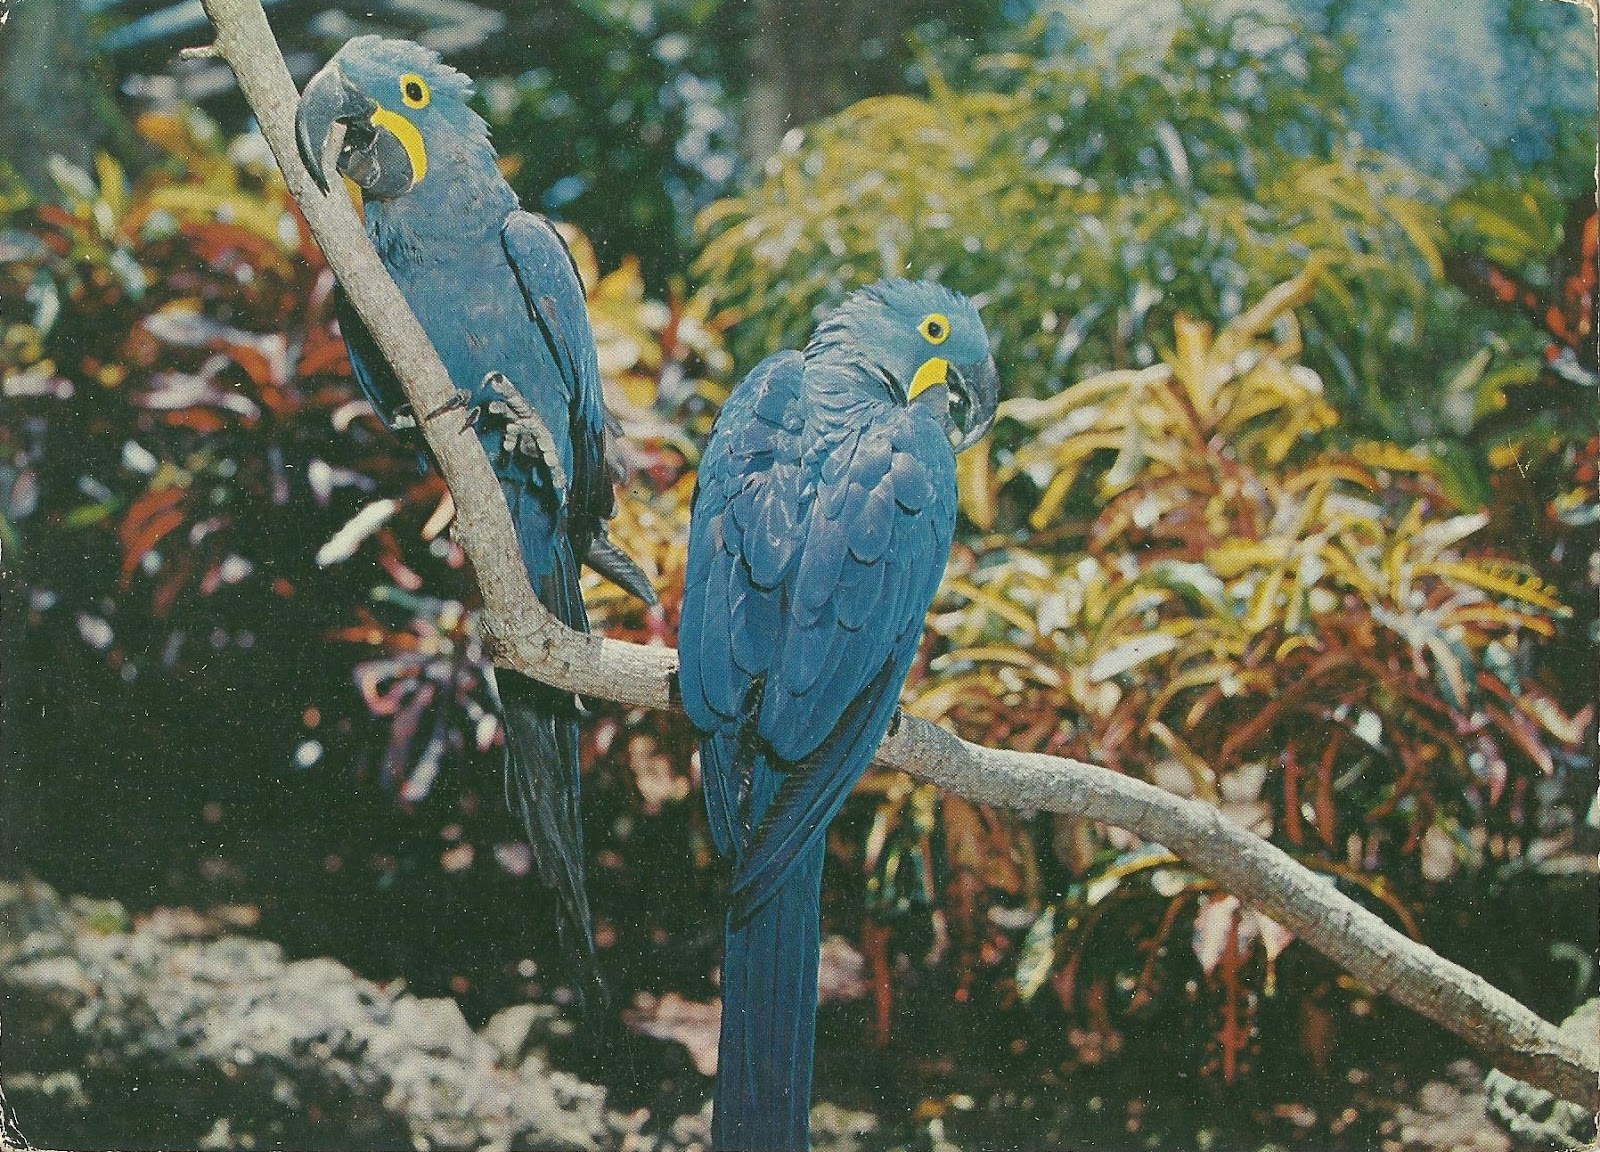 Download this Hyacinth Parrots The Parrot Jungle Miami Florida picture